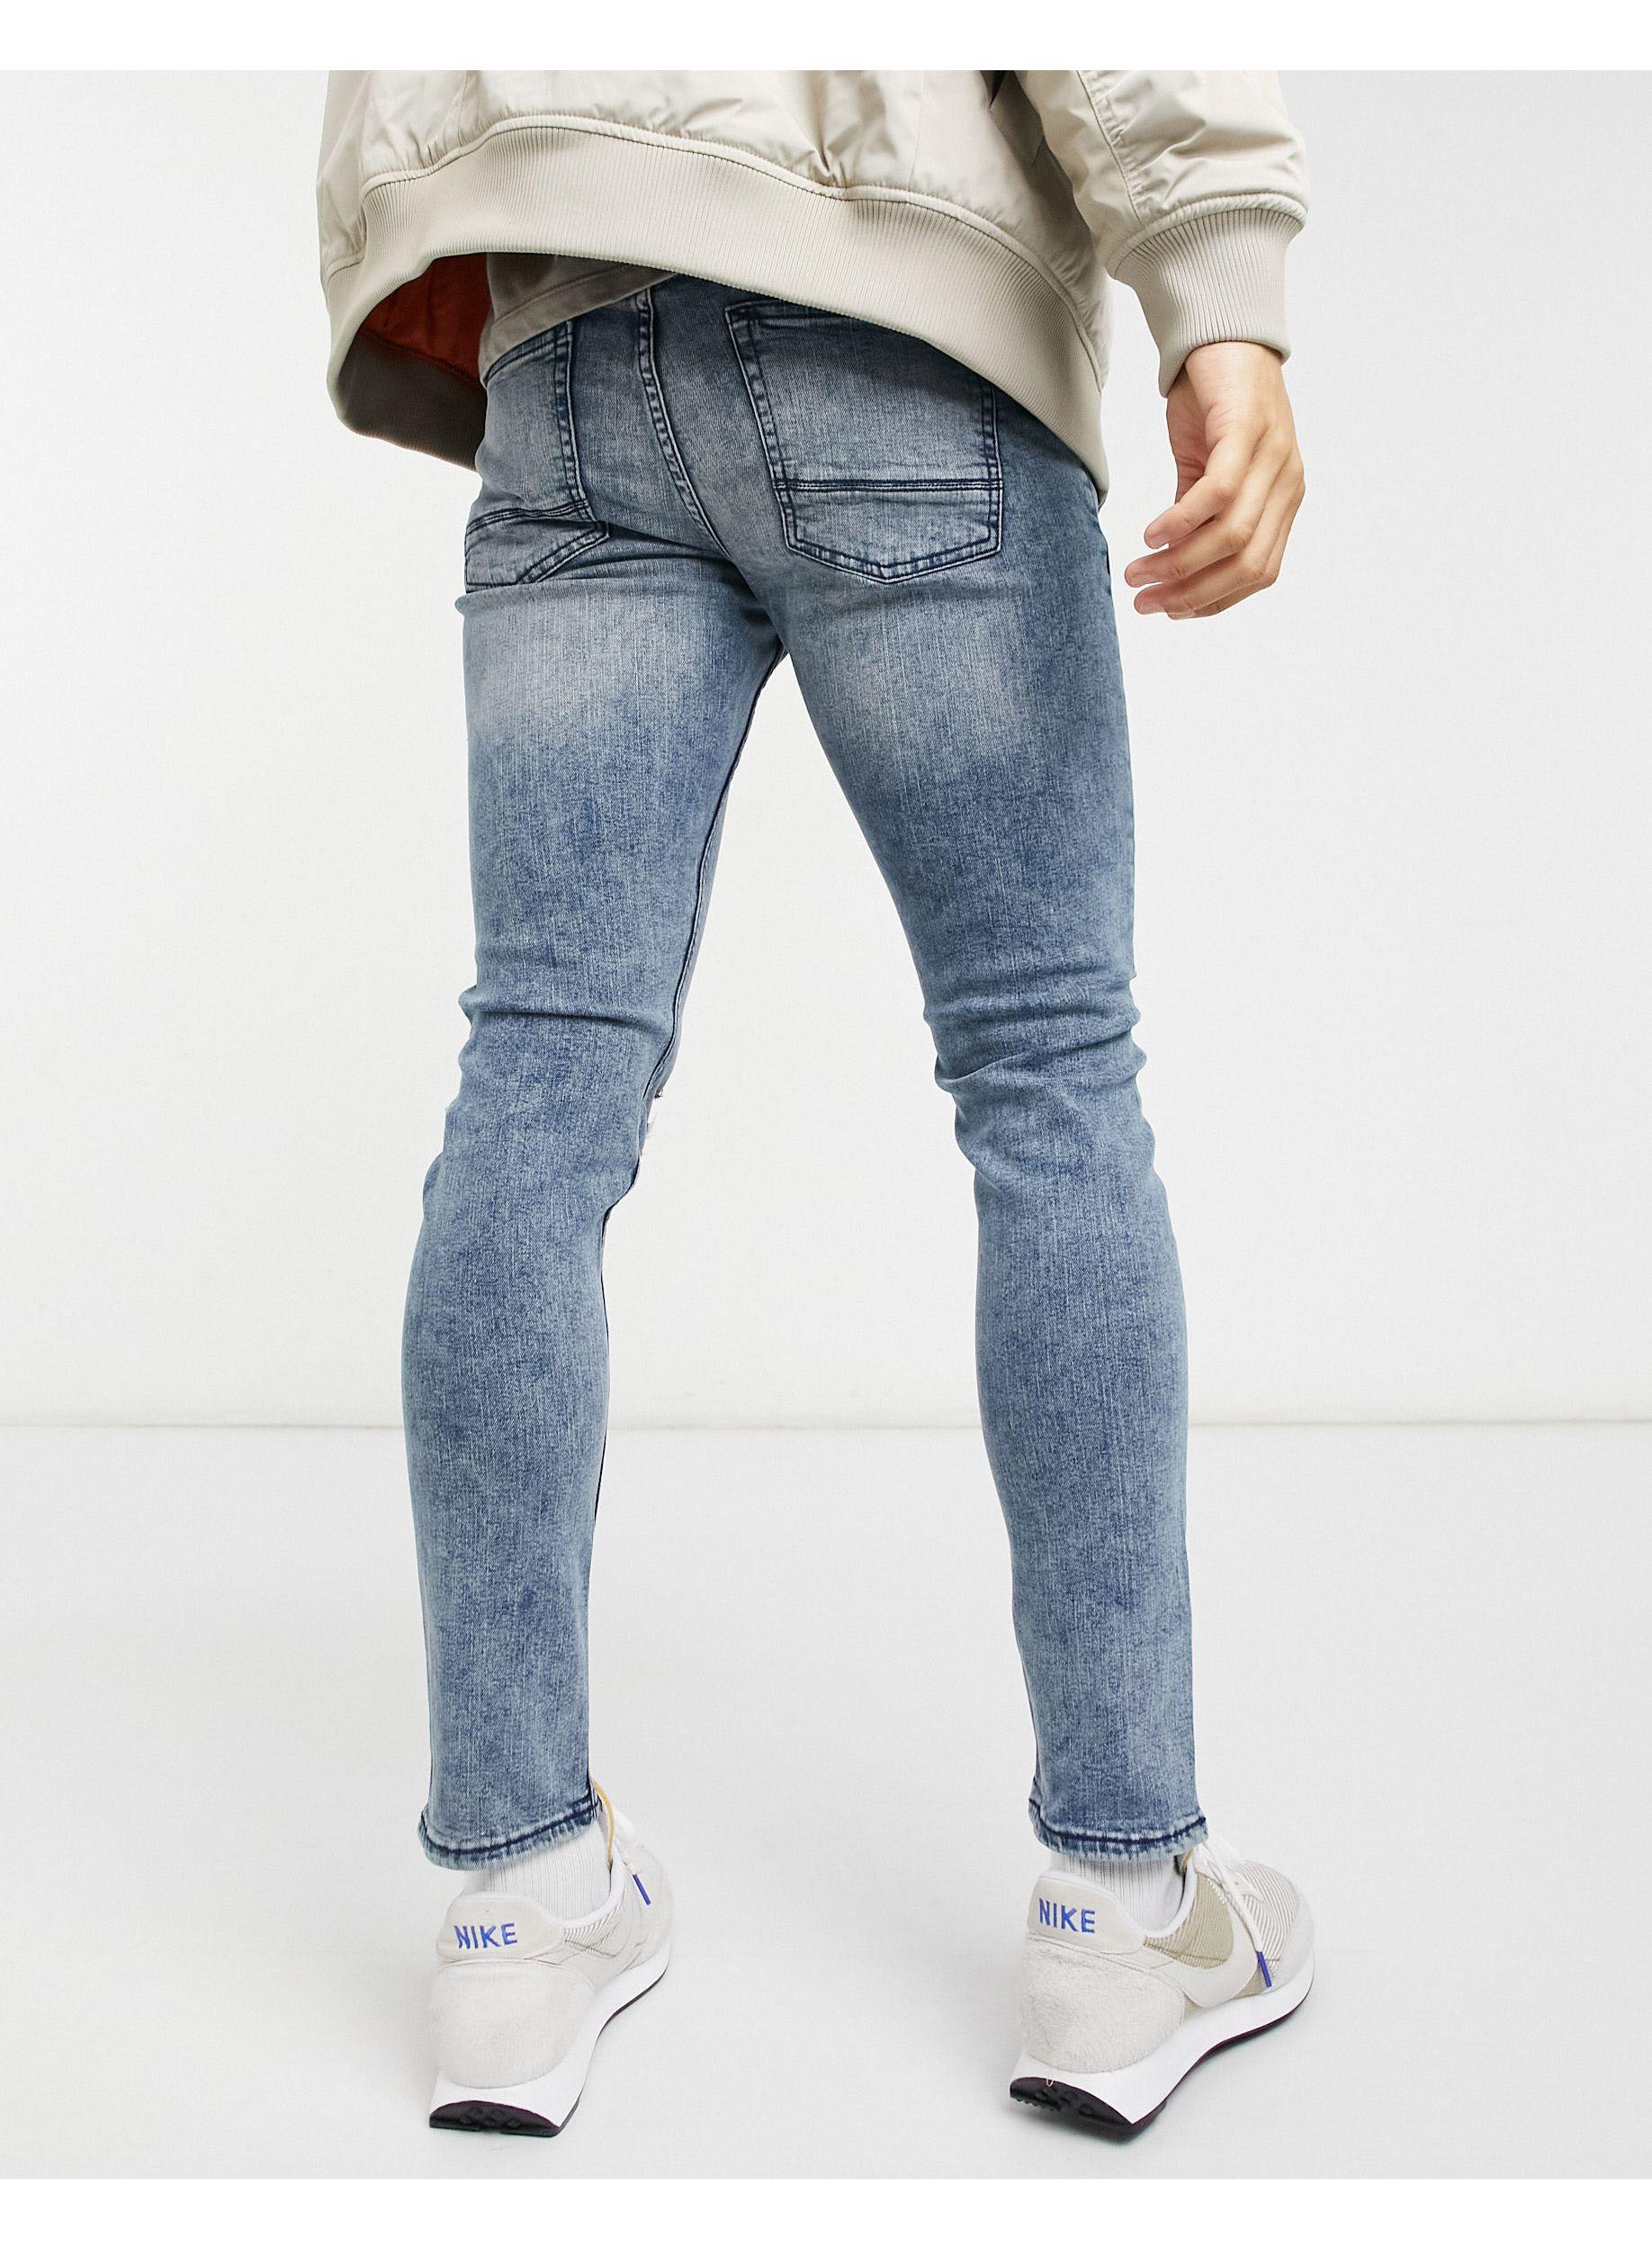 New Look Skinny Jeans With Rips in Blue for Men - Lyst